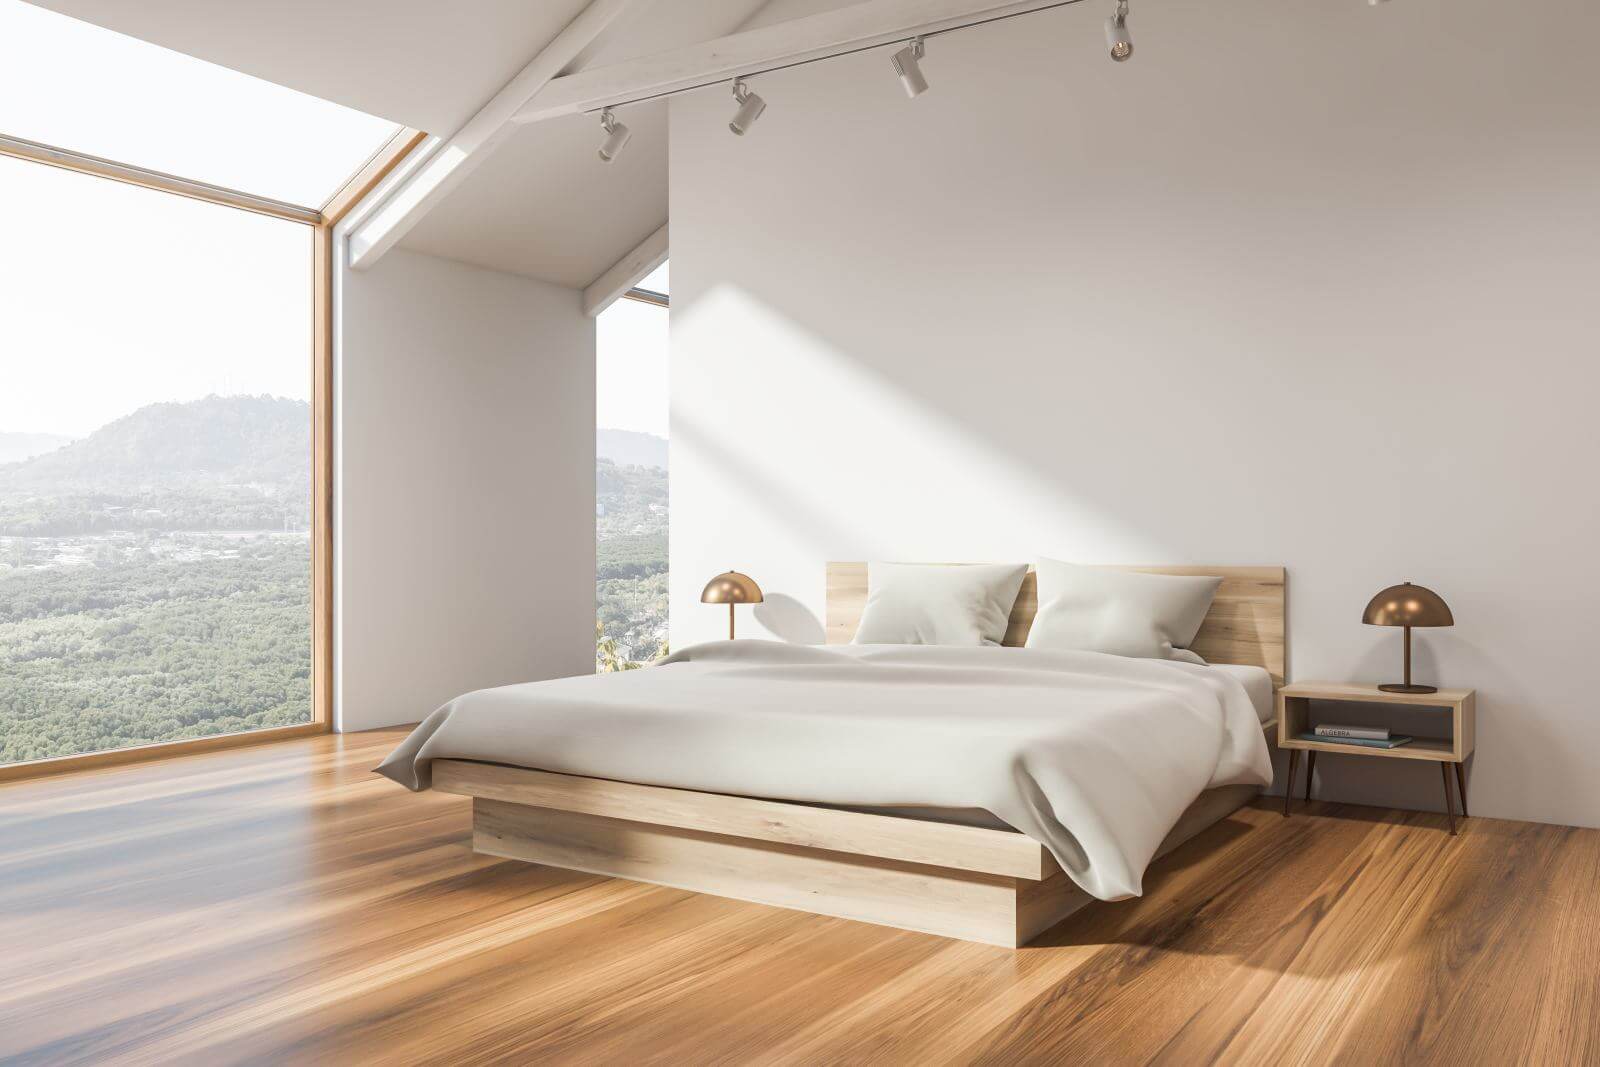 Corner of attic bedroom with white walls, wooden floor, master bed with white blanket and window with mountain view. 3d rendering